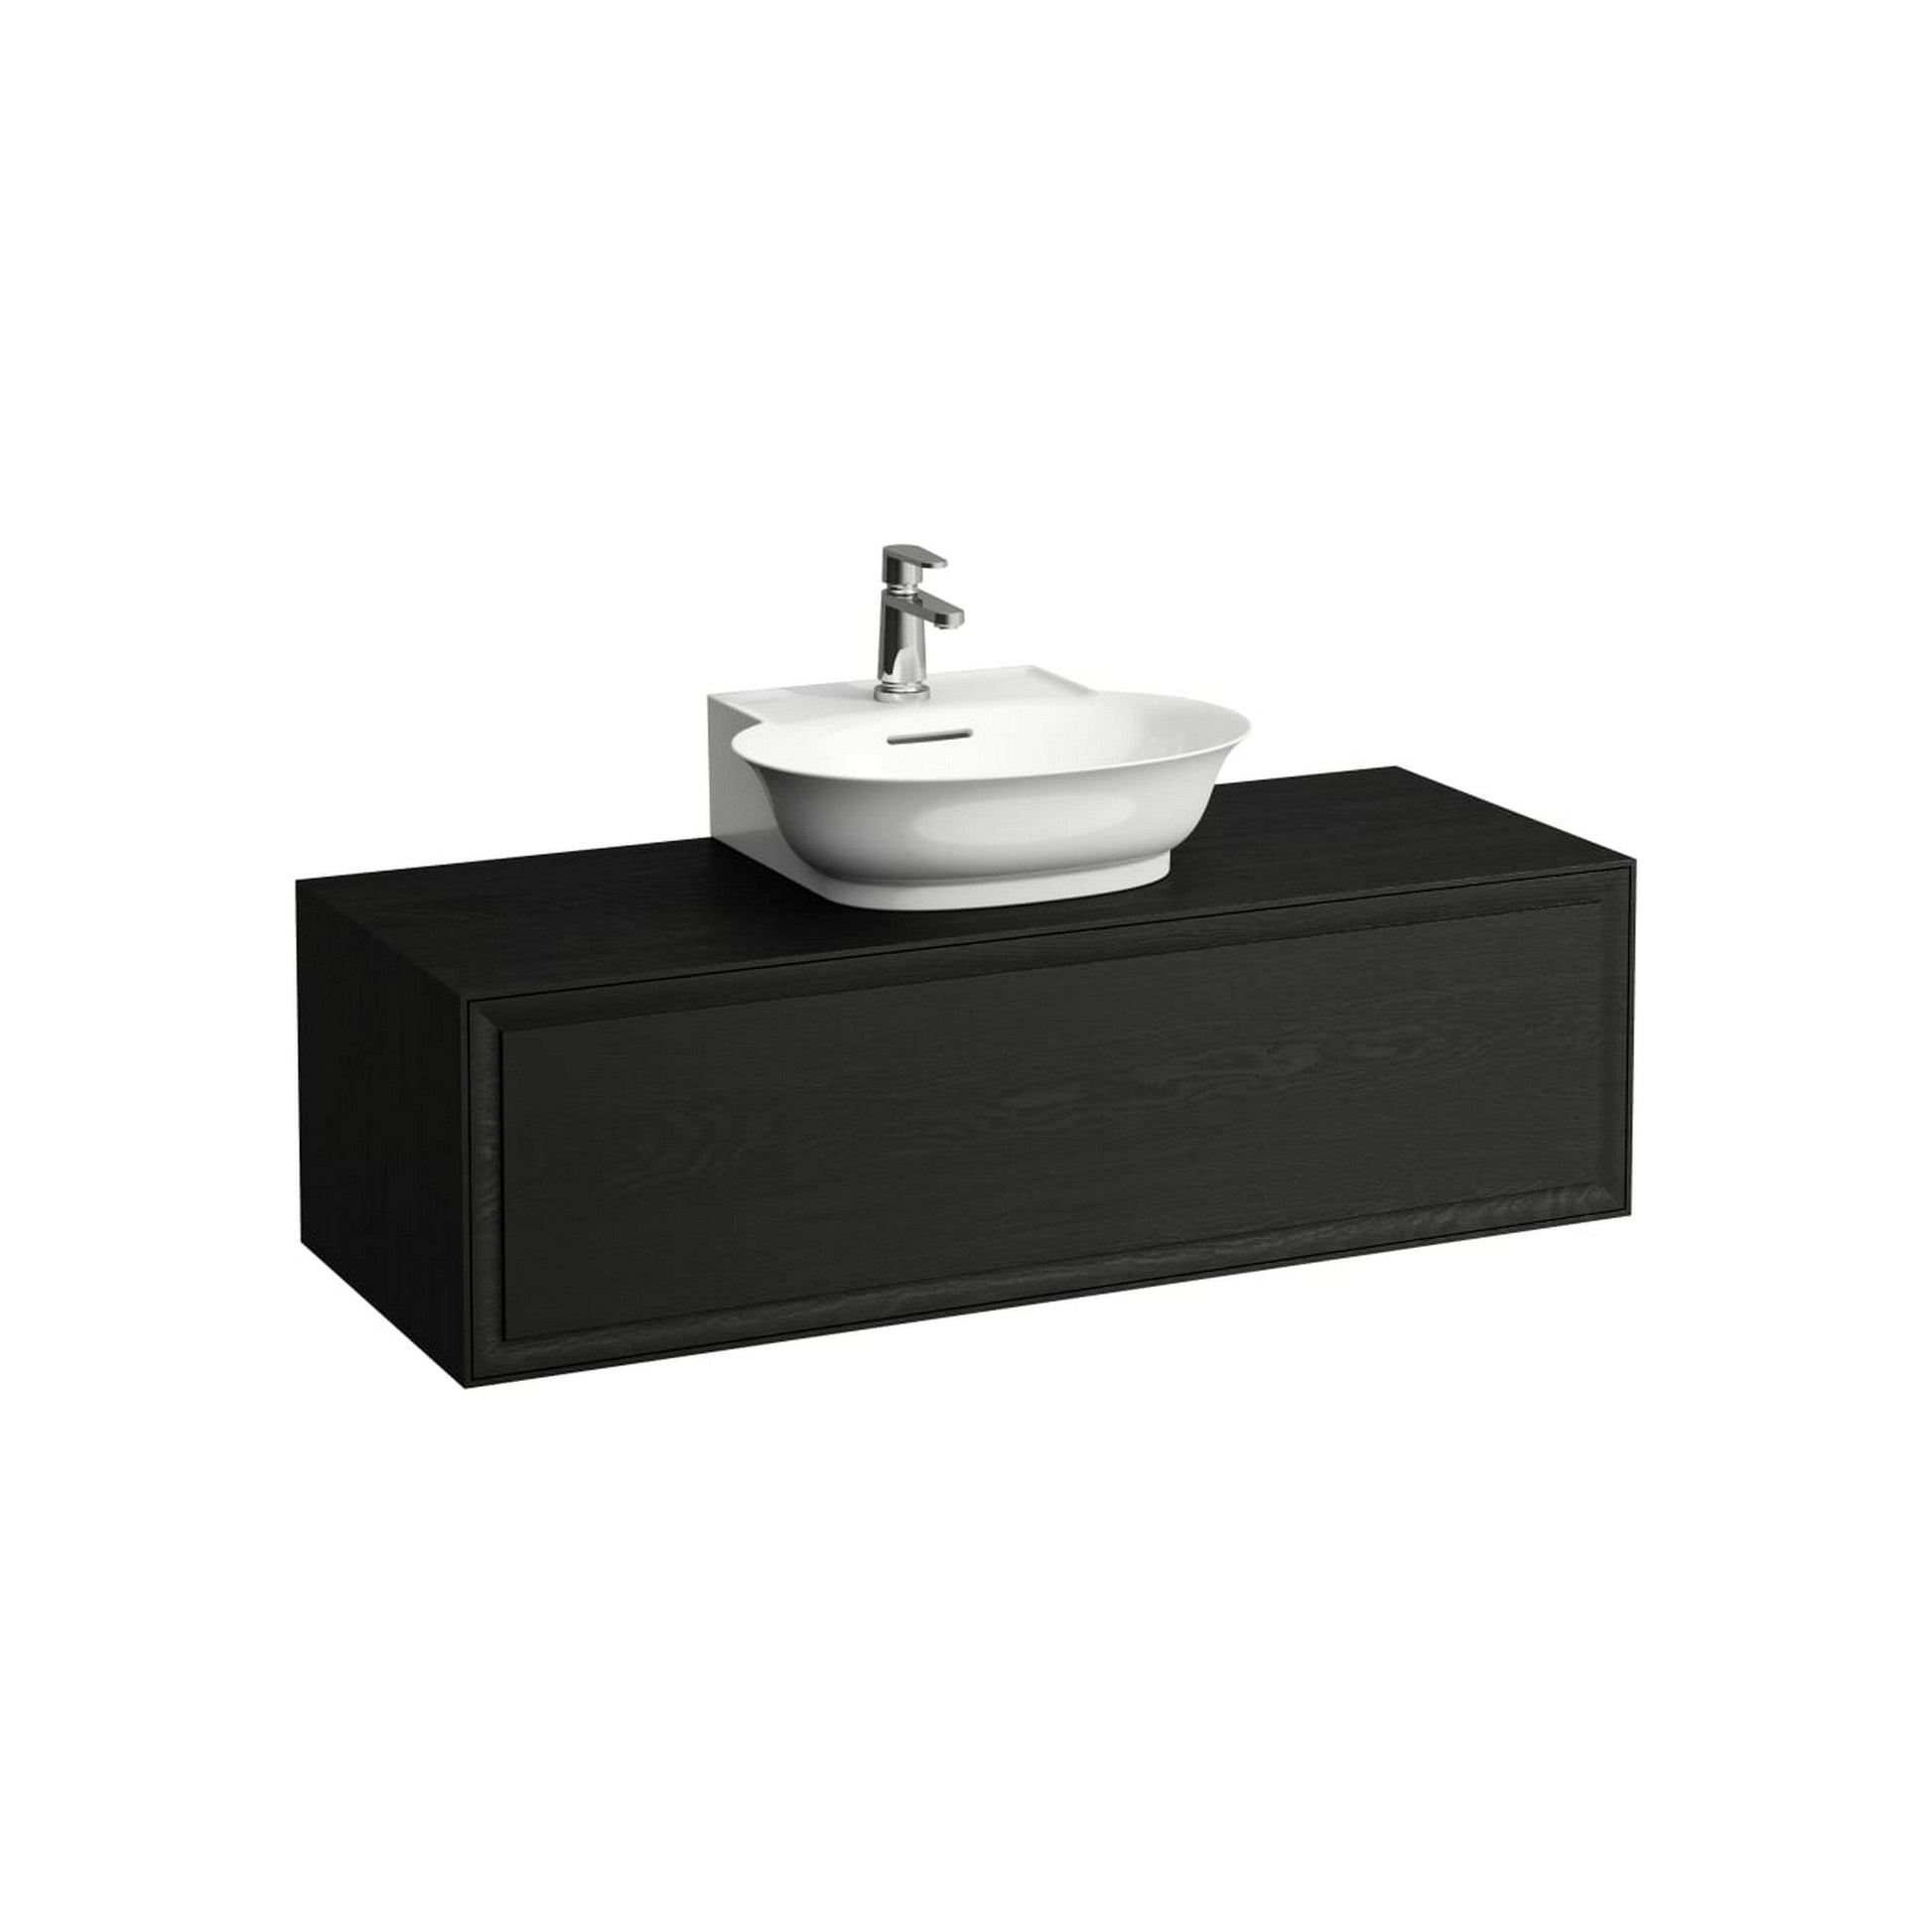 Laufen New Classic 46" 1-Drawer Blacked Oak Wall-Mounted Vanity for New Classic Bathroom Sink Model: H816852